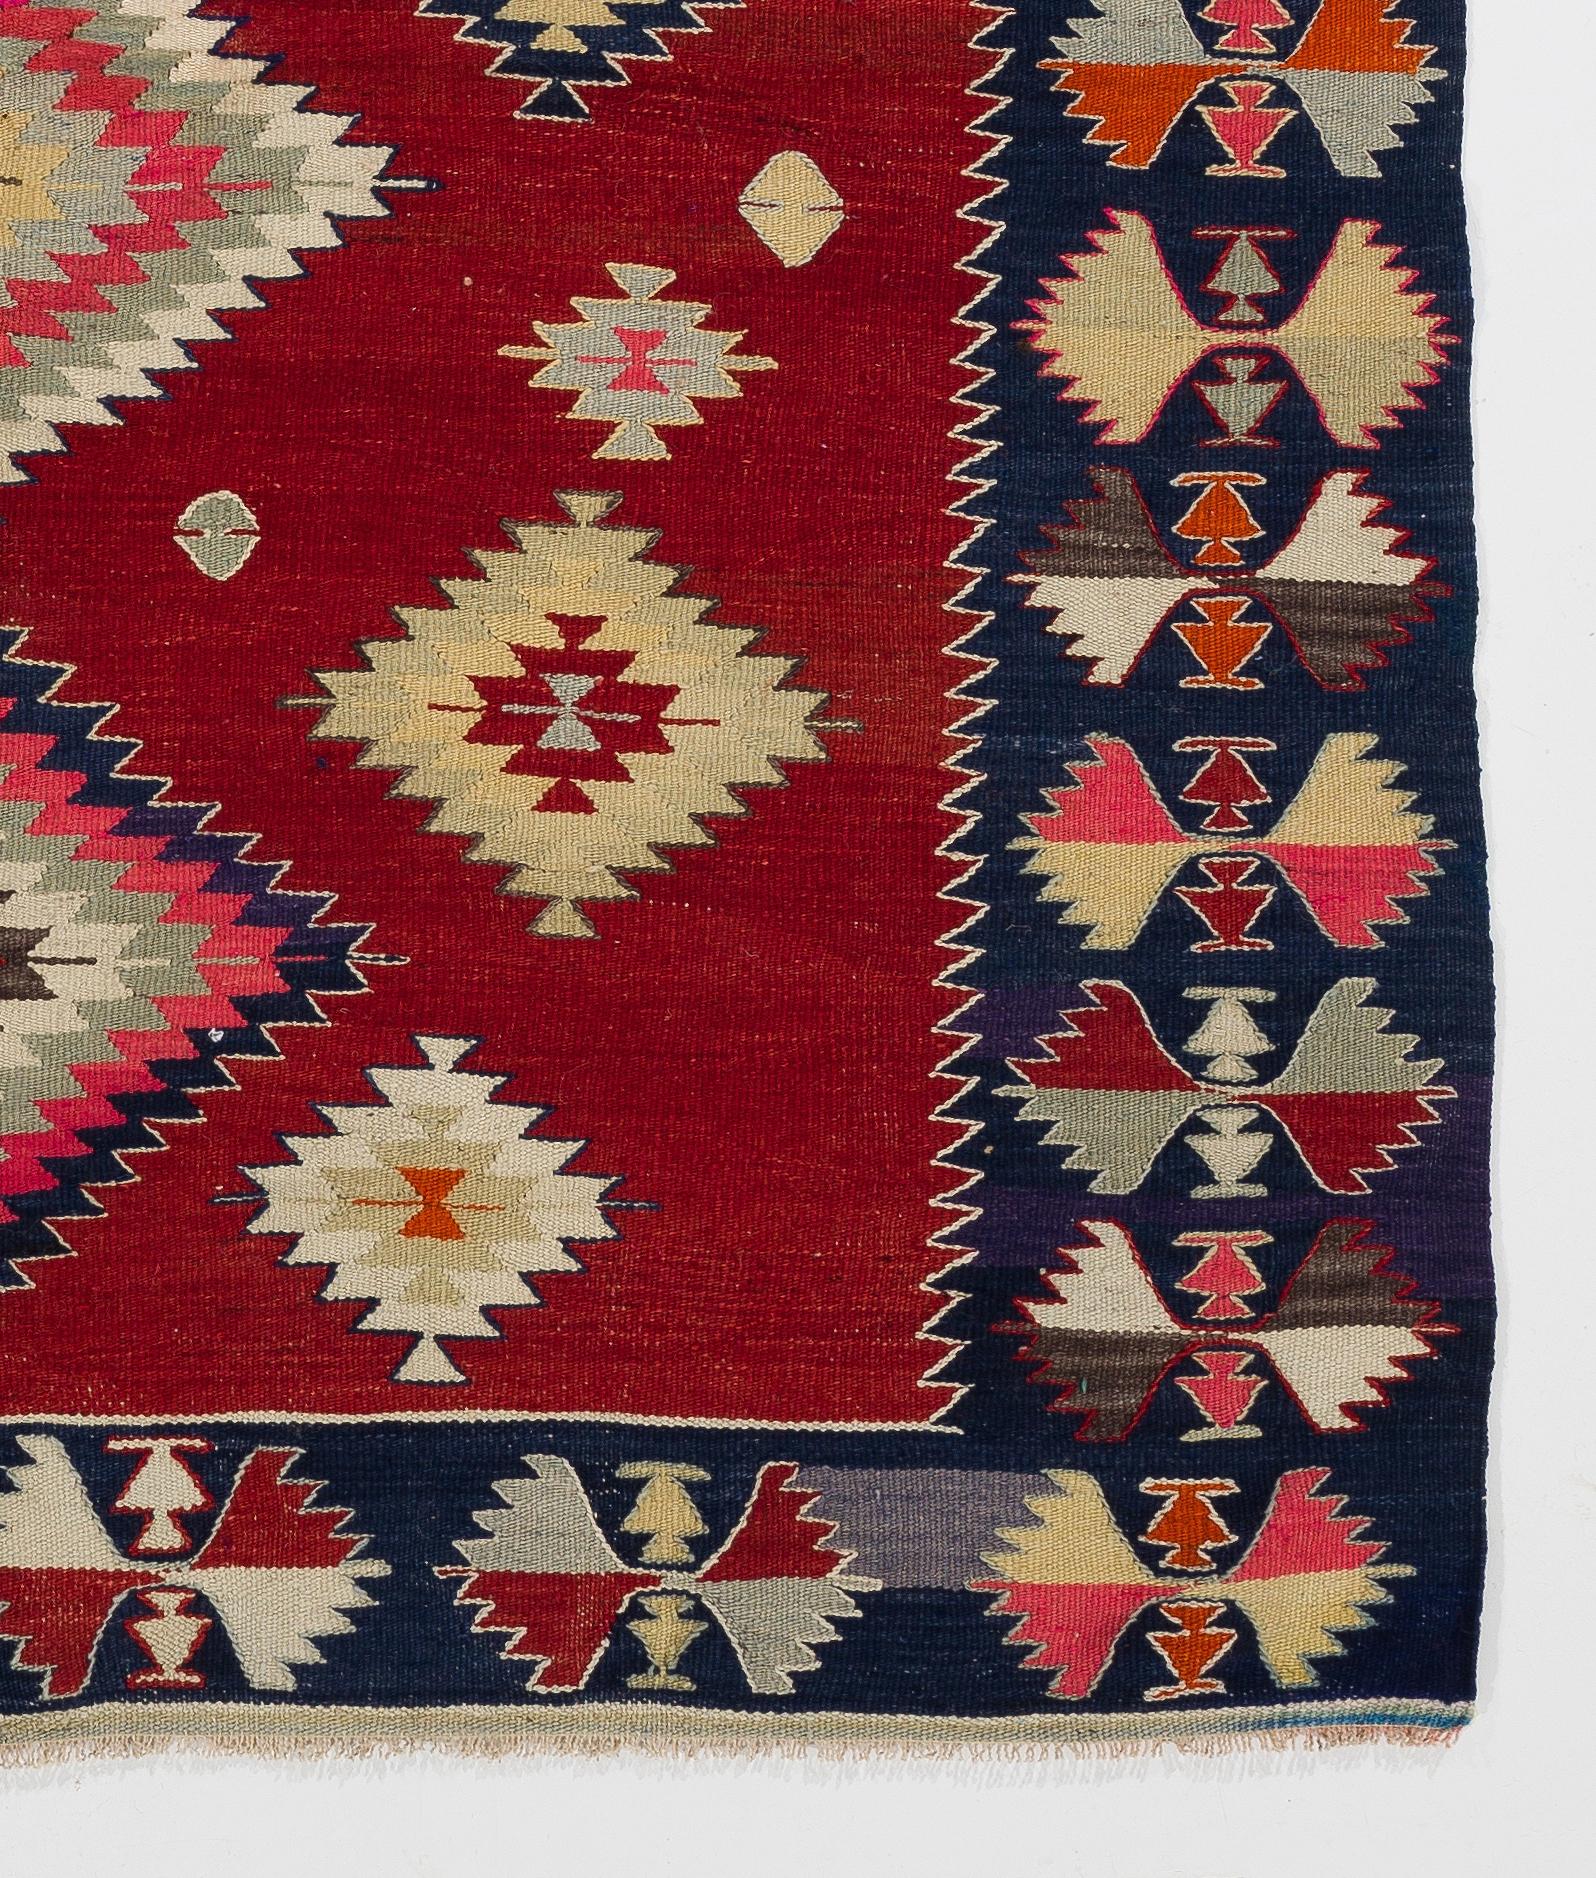 20th Century 5.8x6.8 Ft Vintage Anatolian Kilim Rug in Red with Geometric Design, 100% Wool For Sale